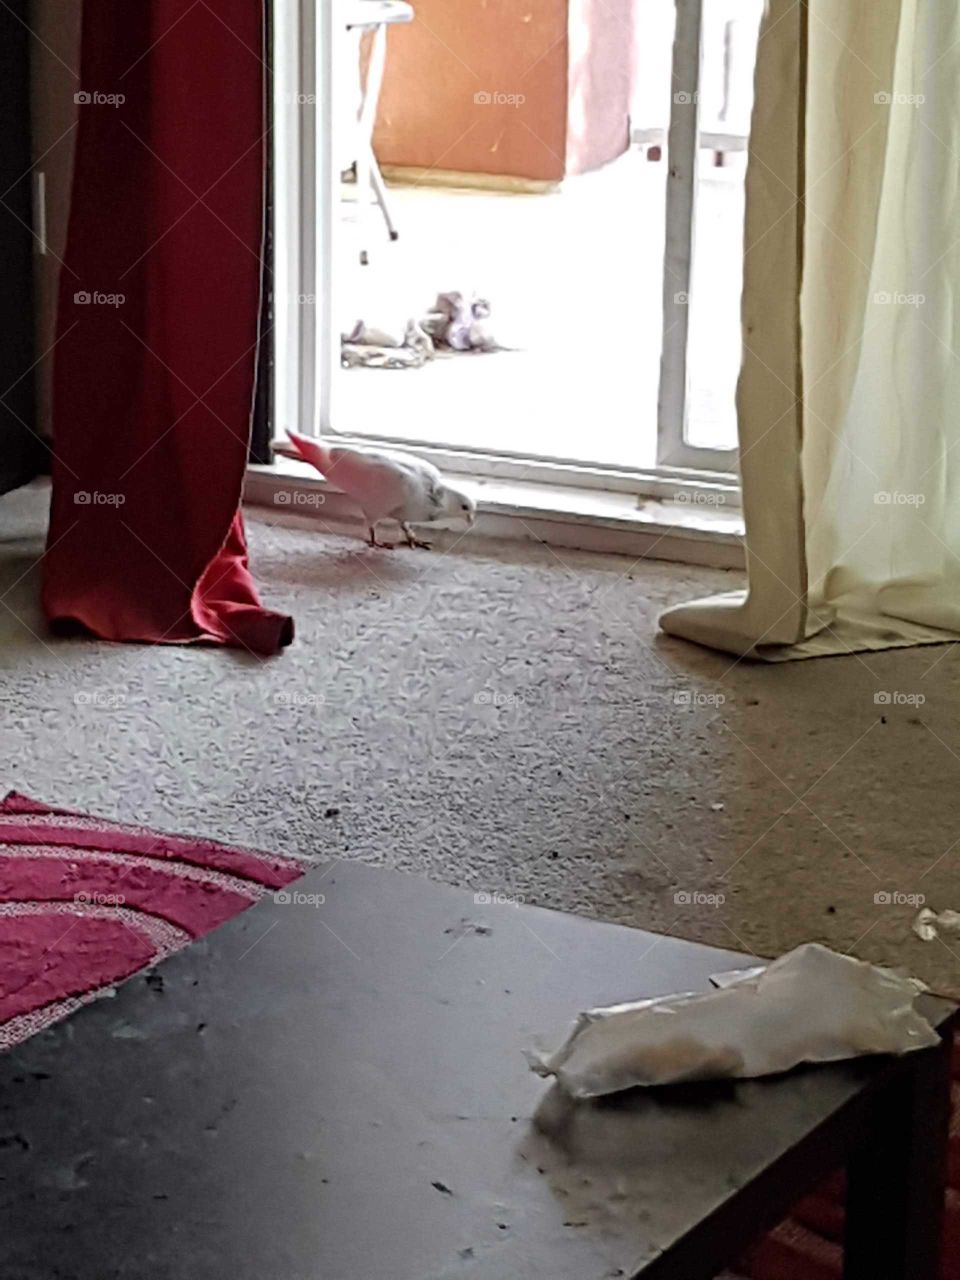 An unwanted guest flew into our home and created a mess in a hurry.